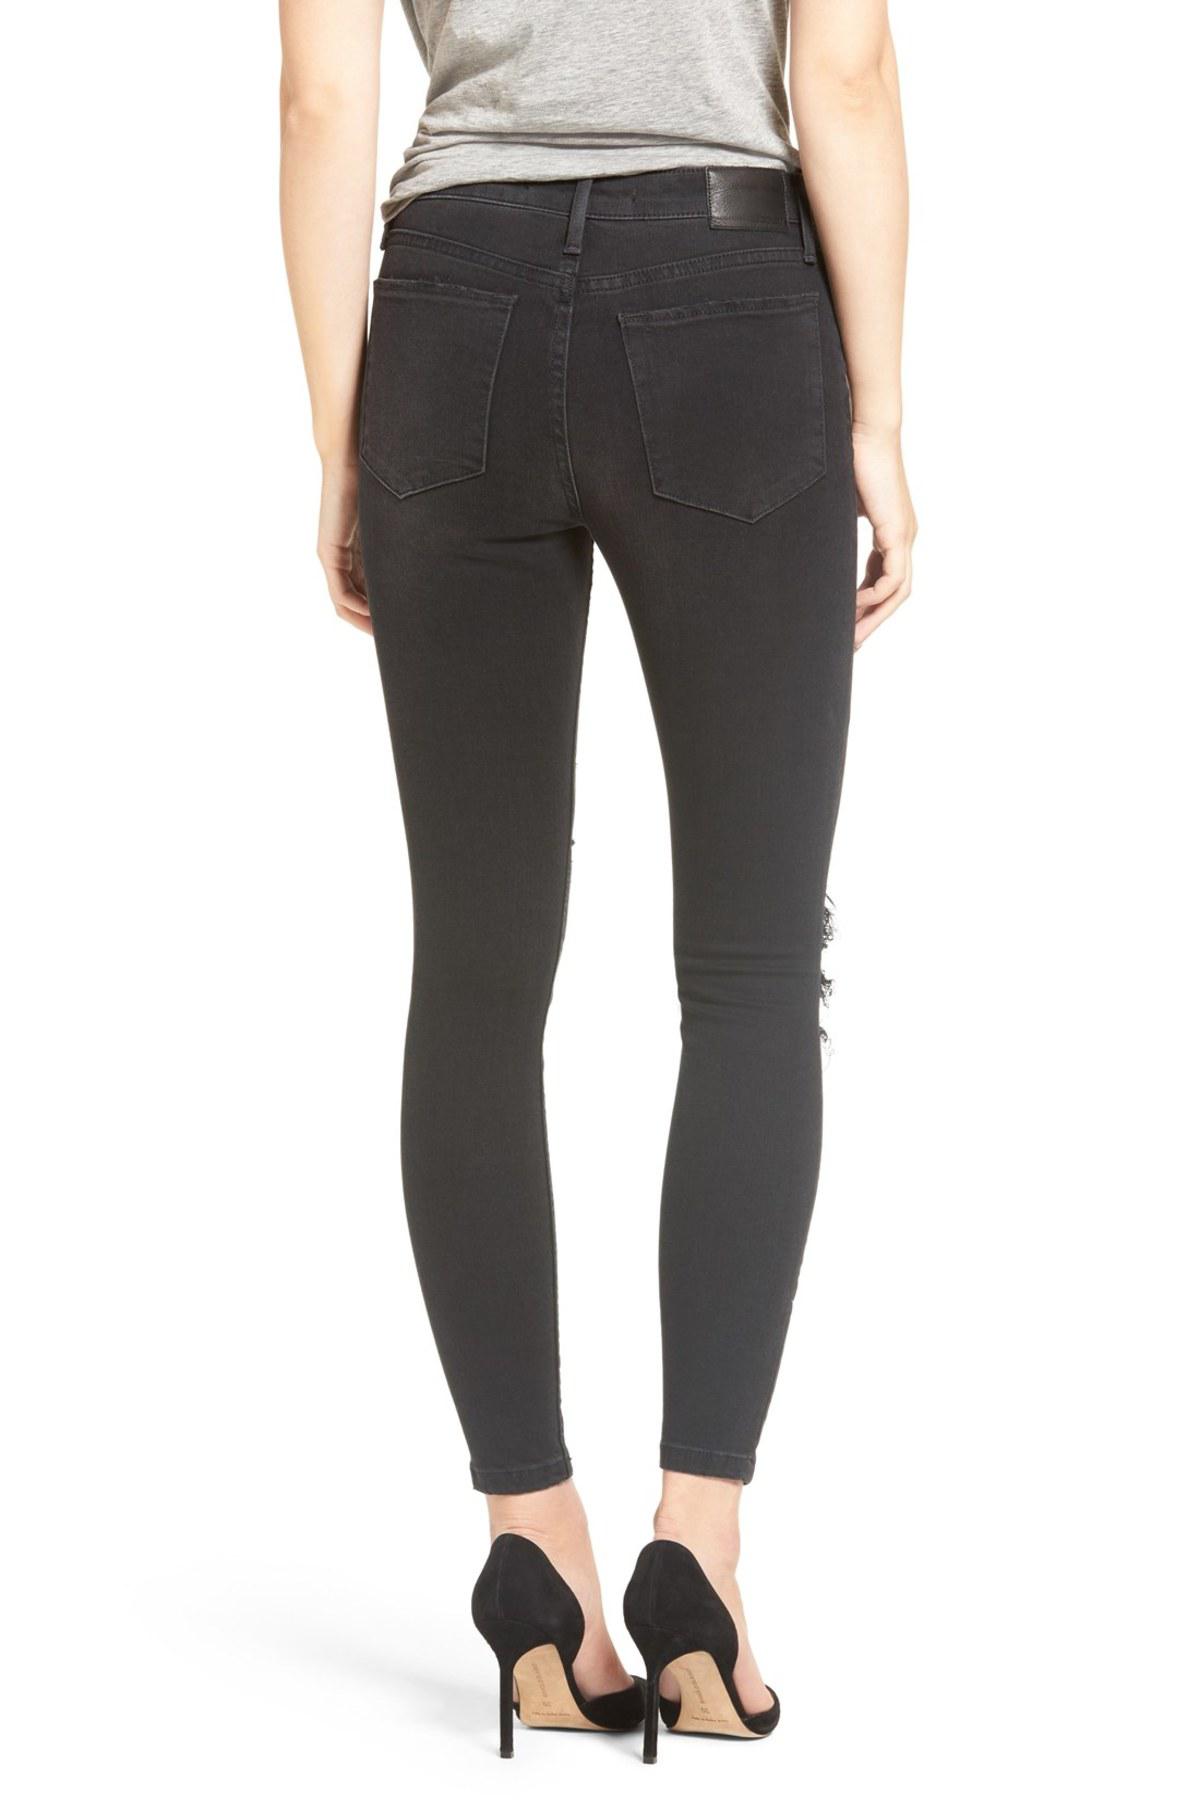 Lyst - Joe'S Jeans Flawless Charlie Lace Patch Ankle Skinny Jeans in Black